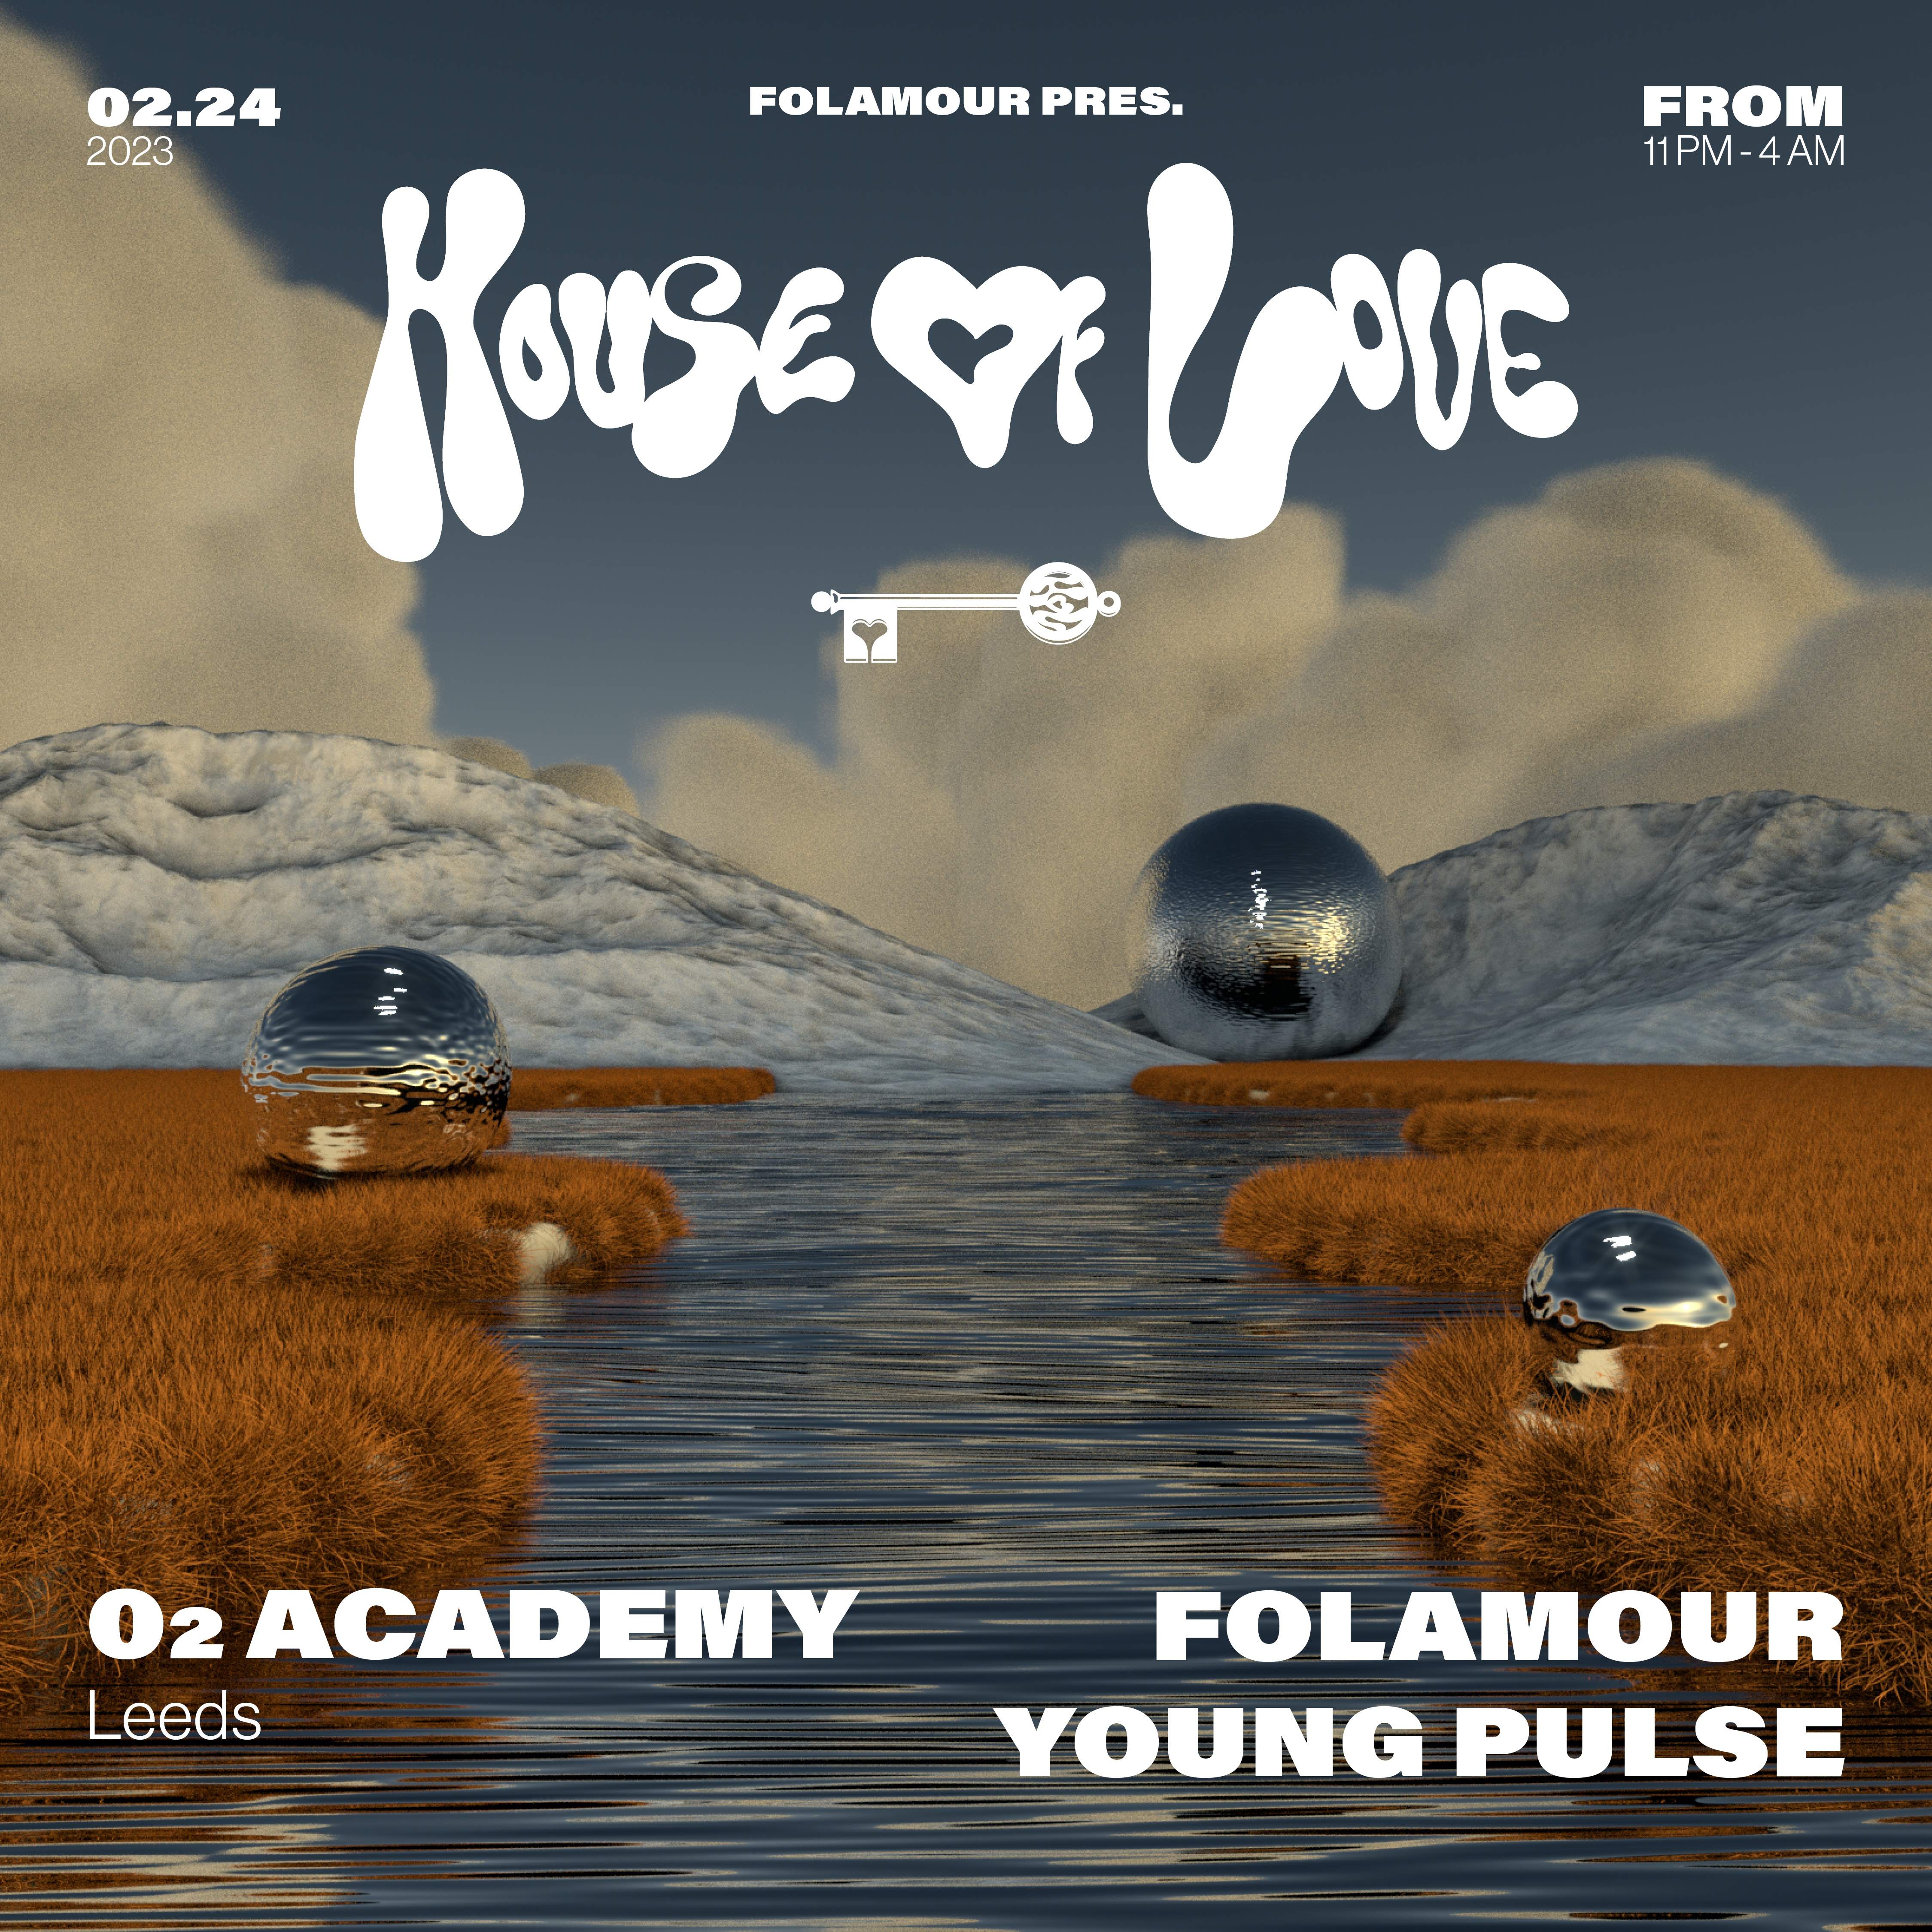 Folamour presents House of Love, Leeds - フライヤー裏